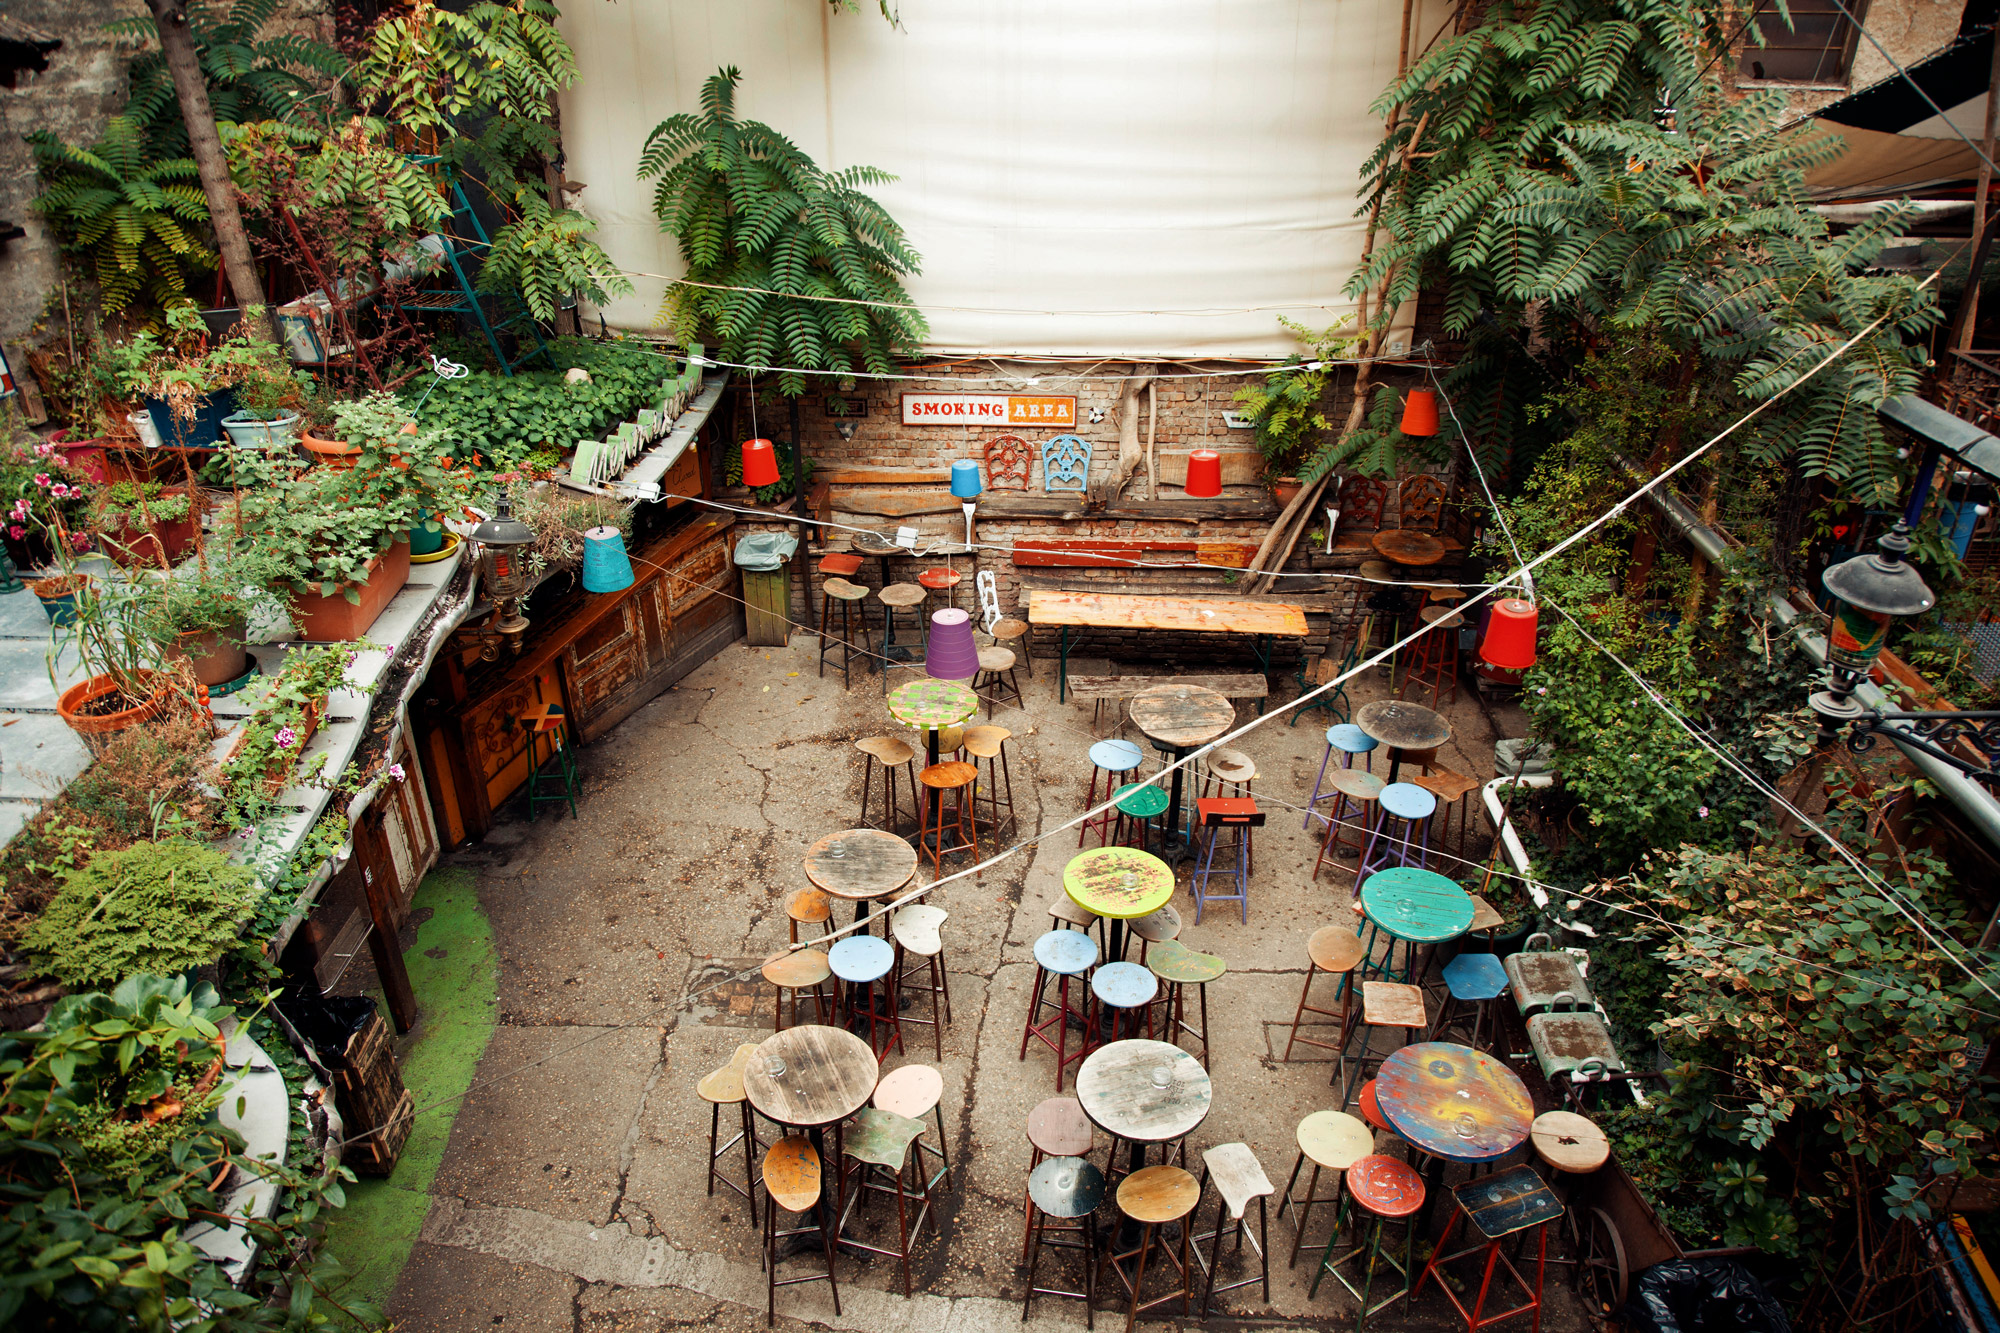 Unique unusually decorated bar with plants and vintage furniture